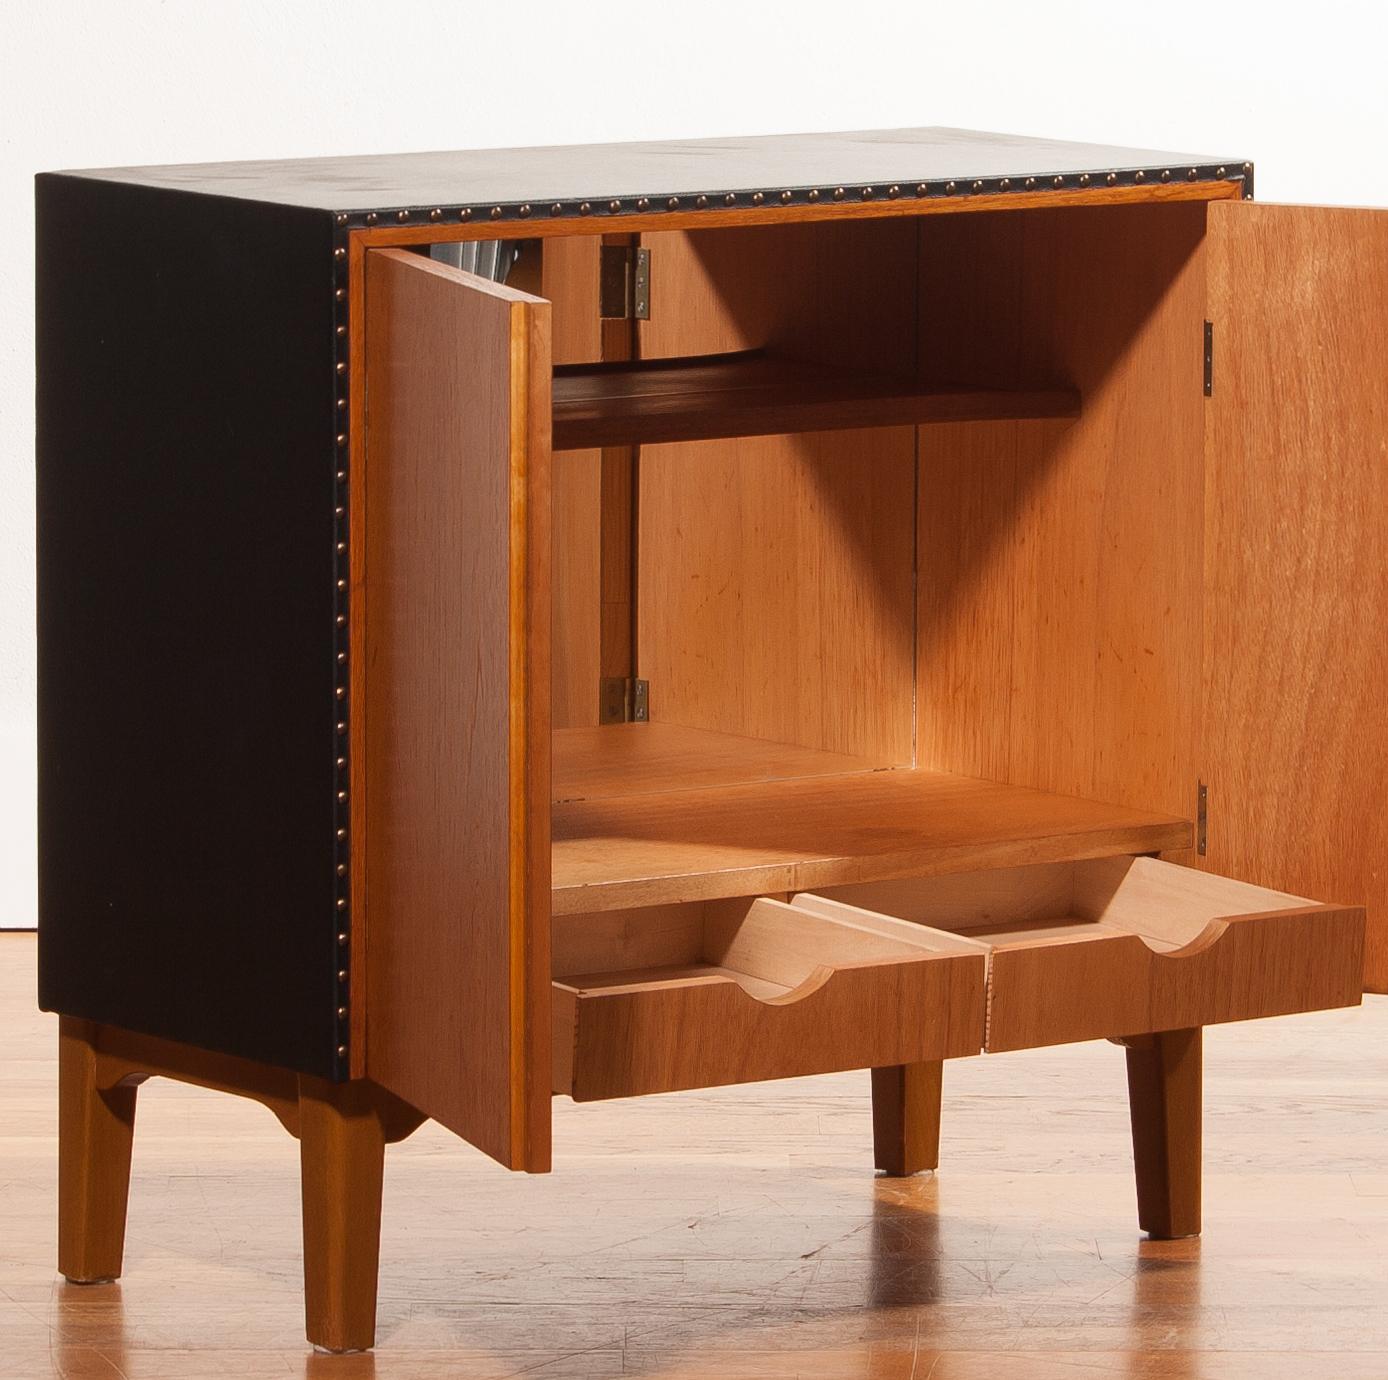 Beautiful mini-bar in teak and covered with black leatherette designed by Bertil Fridhagen for Bodafors.
The mini bar is complete with the original mirror-back, hollow shaped shelf for the glasses and two drawers.
All in perfect condition.
A